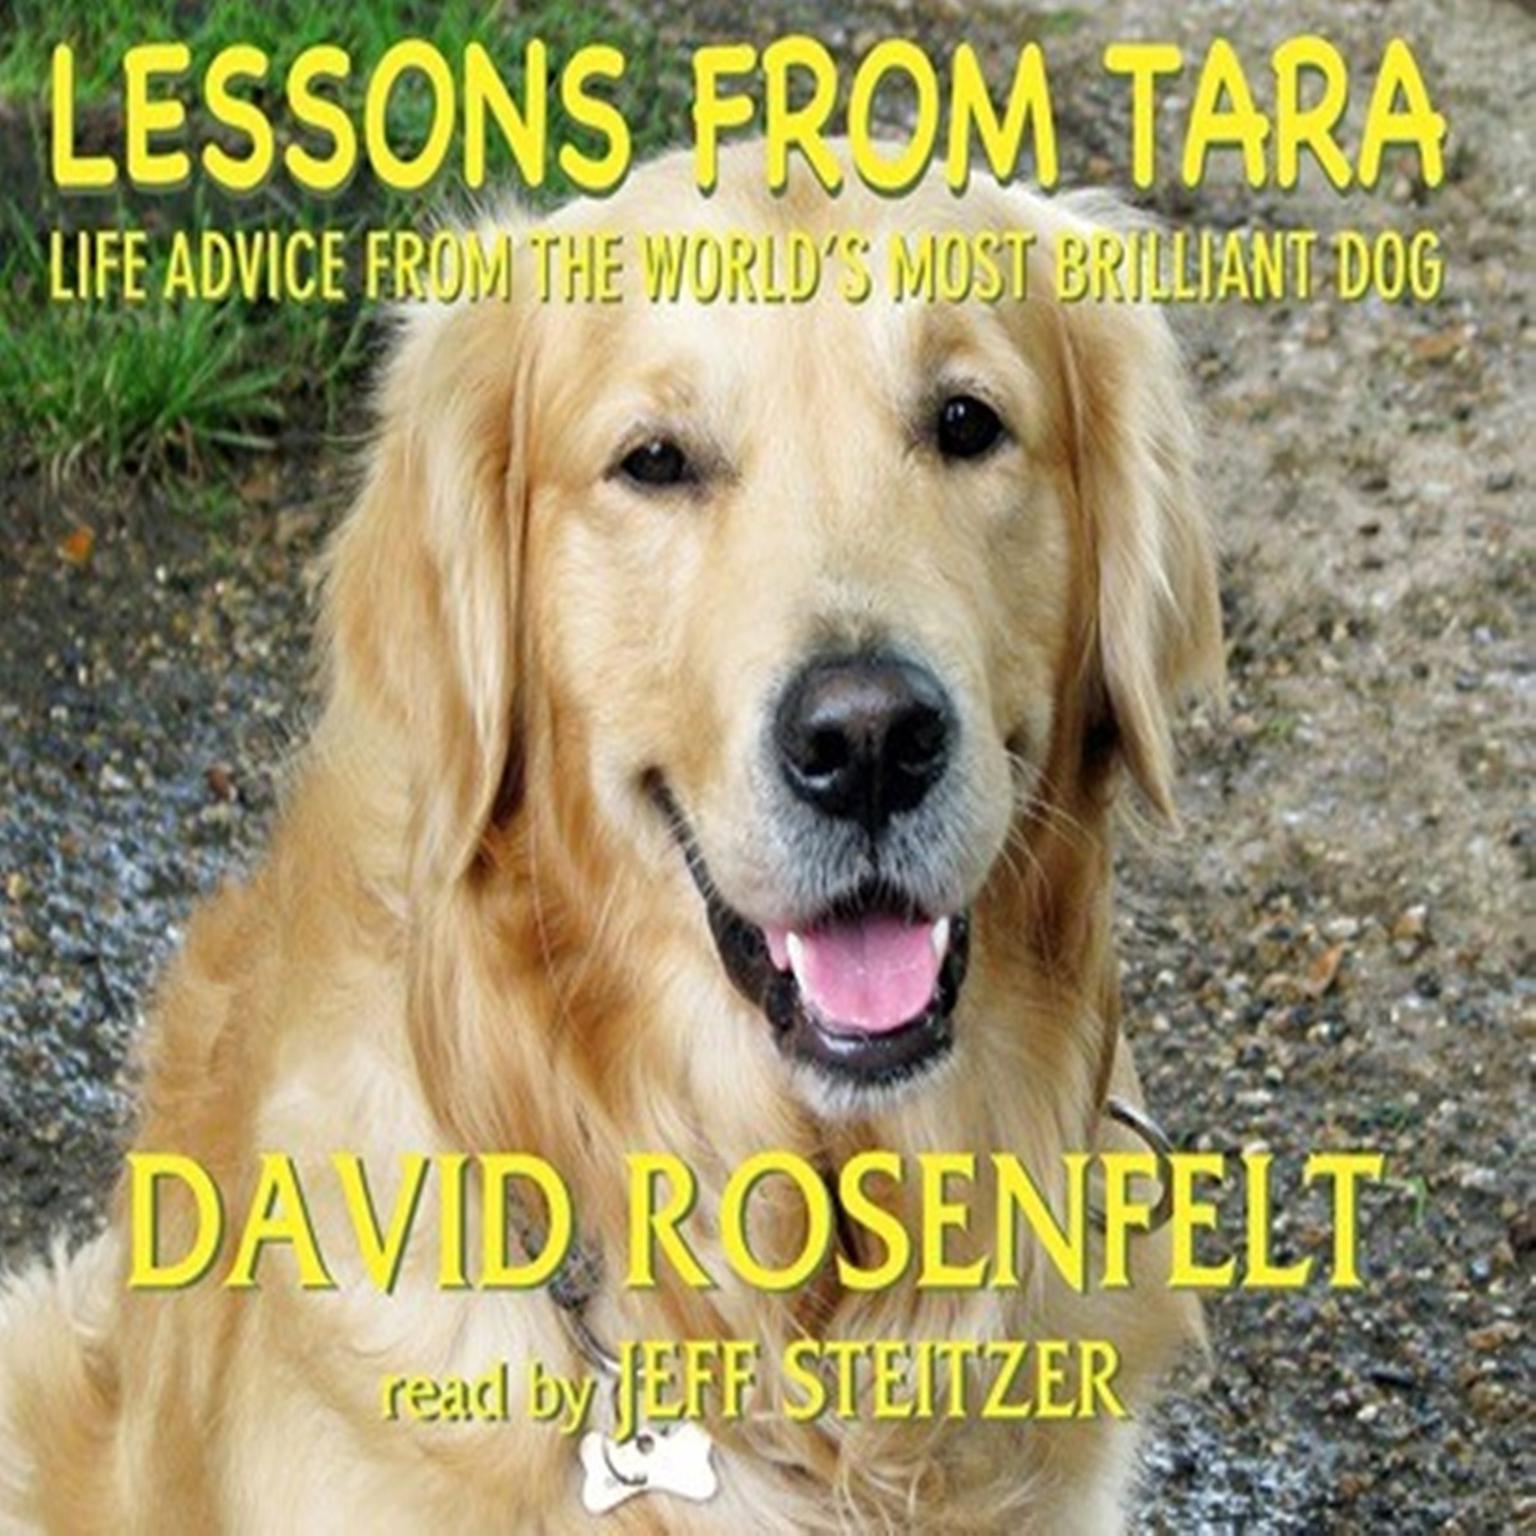 Lessons from Tara: Life Advice from the World’s Most Brilliant Dog Audiobook, by David Rosenfelt